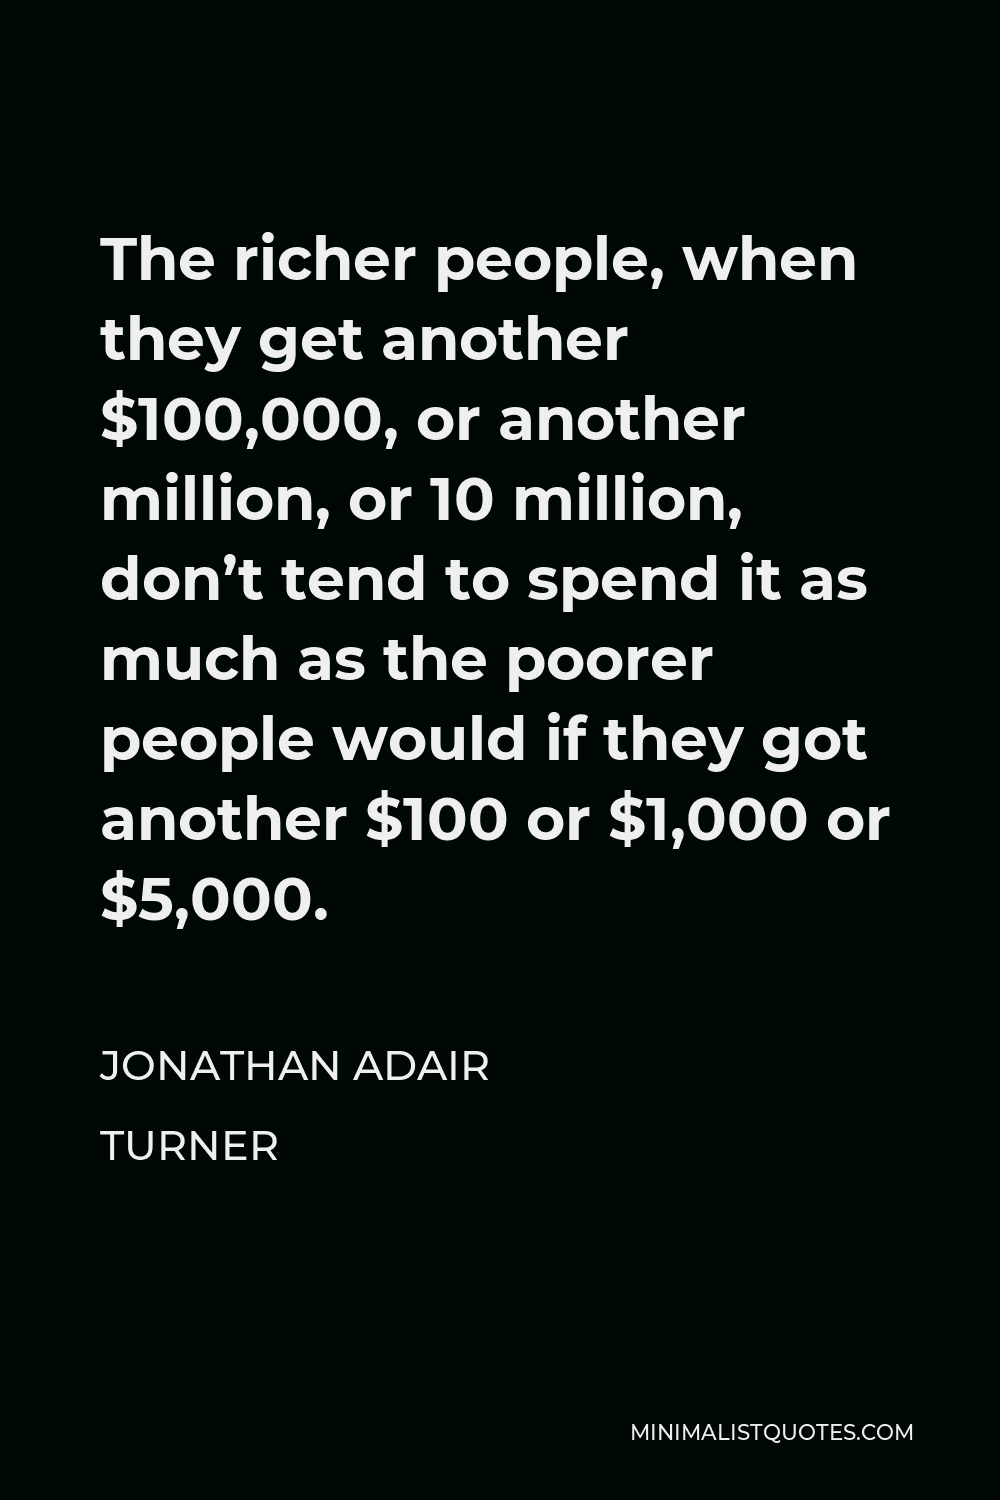 Jonathan Adair Turner Quote - The richer people, when they get another $100,000, or another million, or 10 million, don’t tend to spend it as much as the poorer people would if they got another $100 or $1,000 or $5,000.